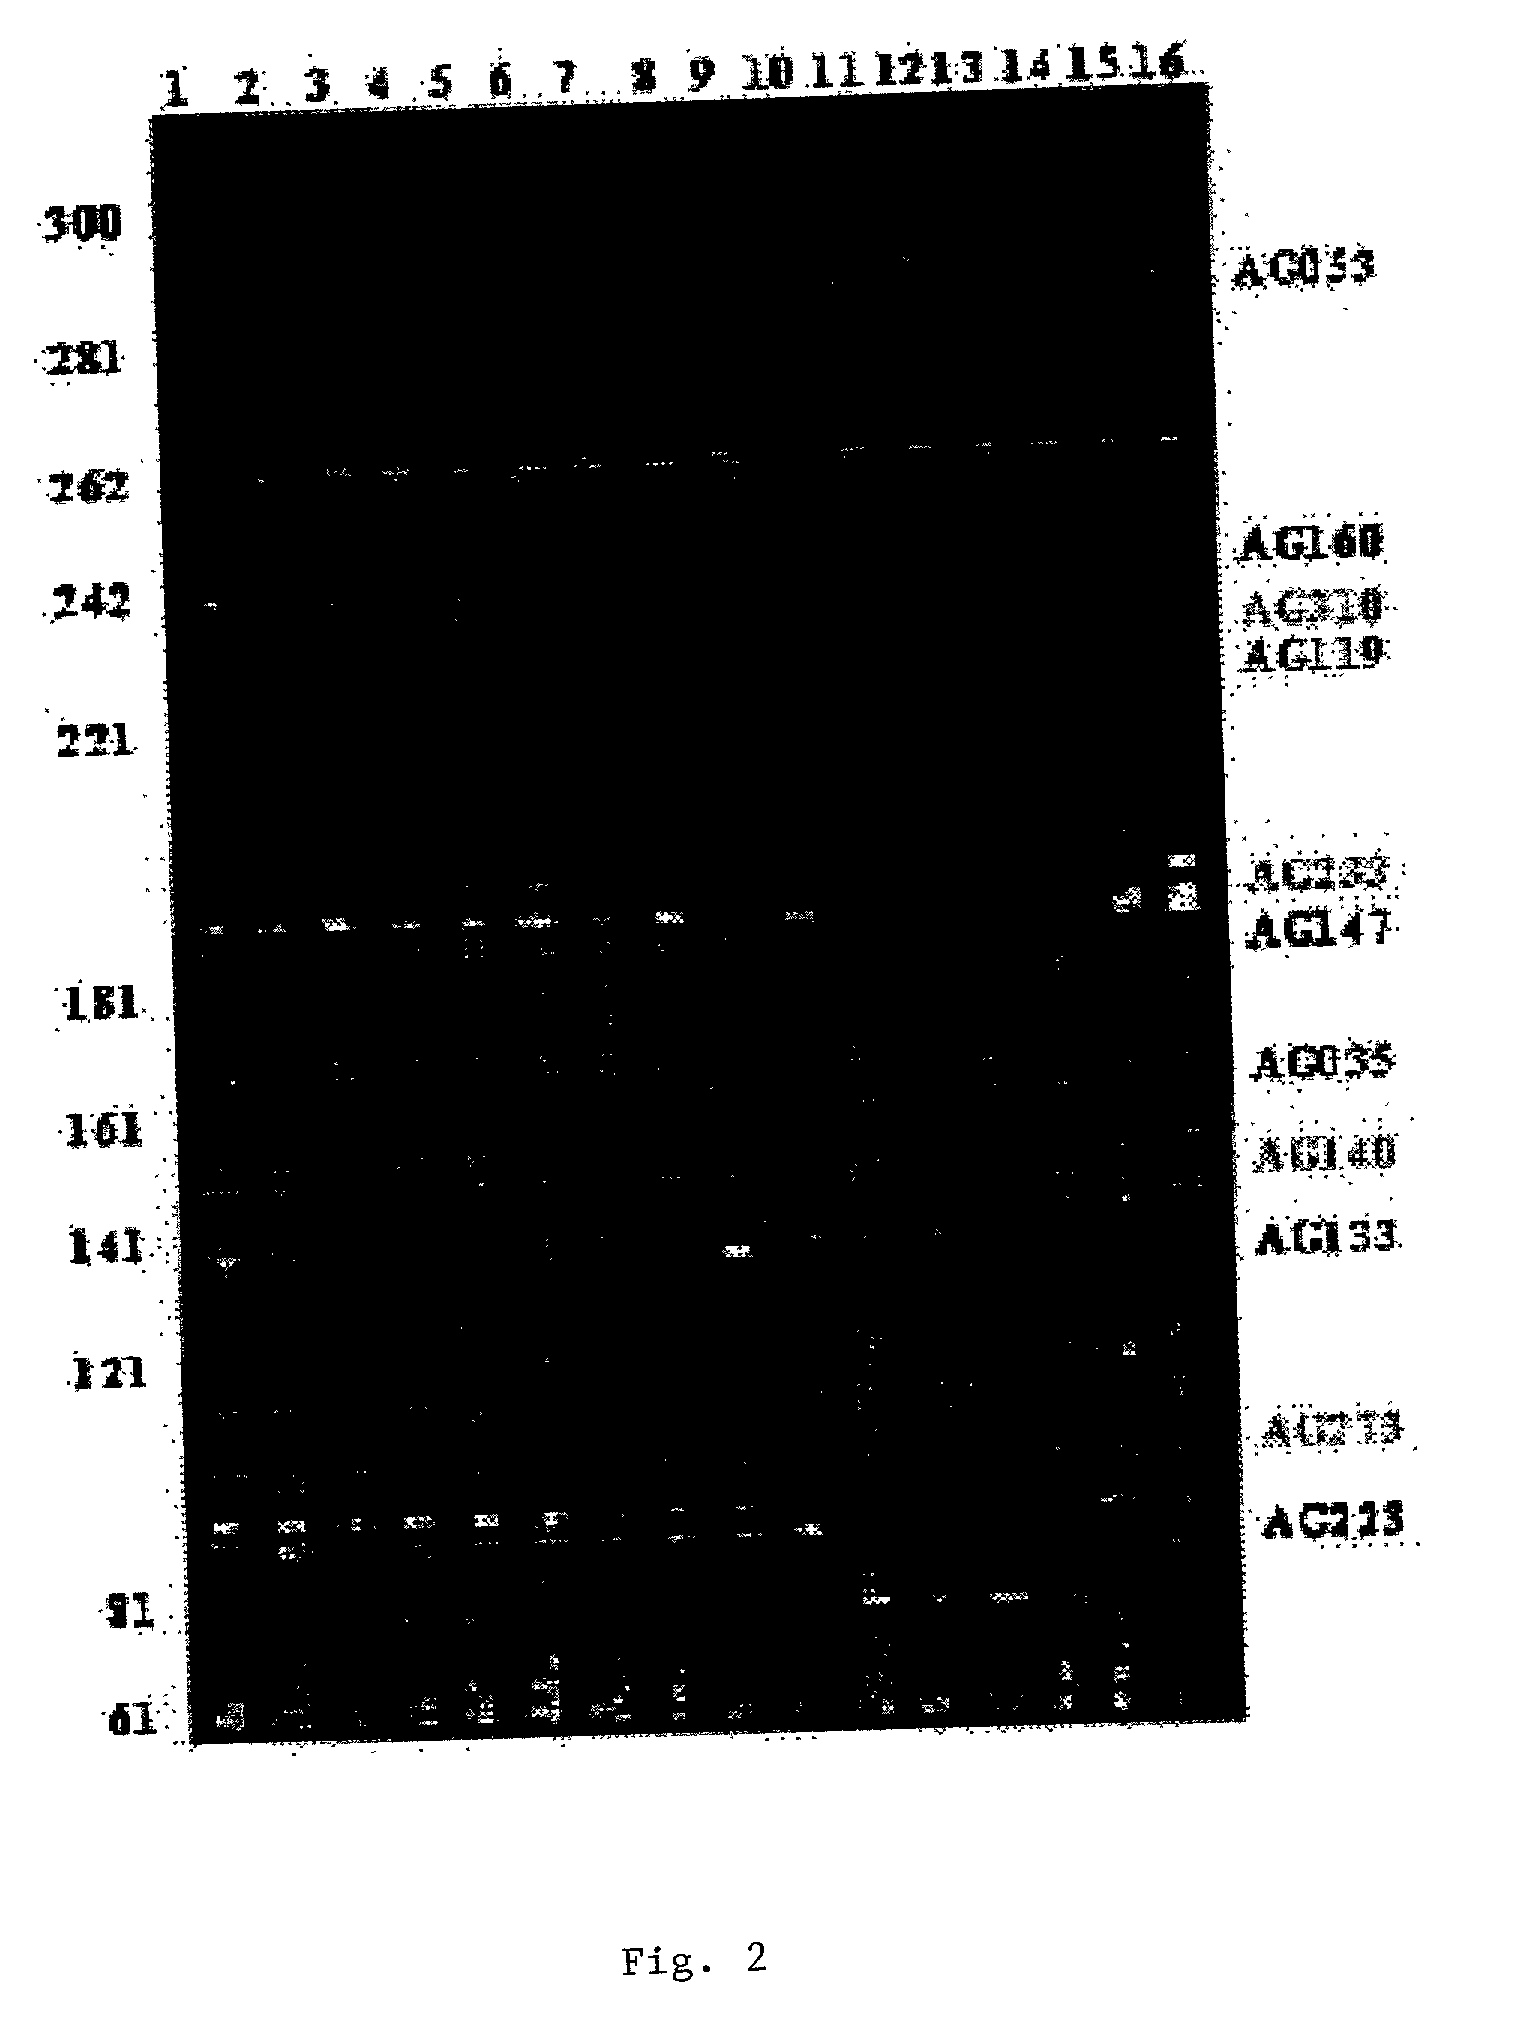 Method for cloning animals with targetted genetic alterations by transfer of long-term cultured male or female somatic cell nuclei, comprising artificially-induced genetic alterations, to enucleated recipient cells